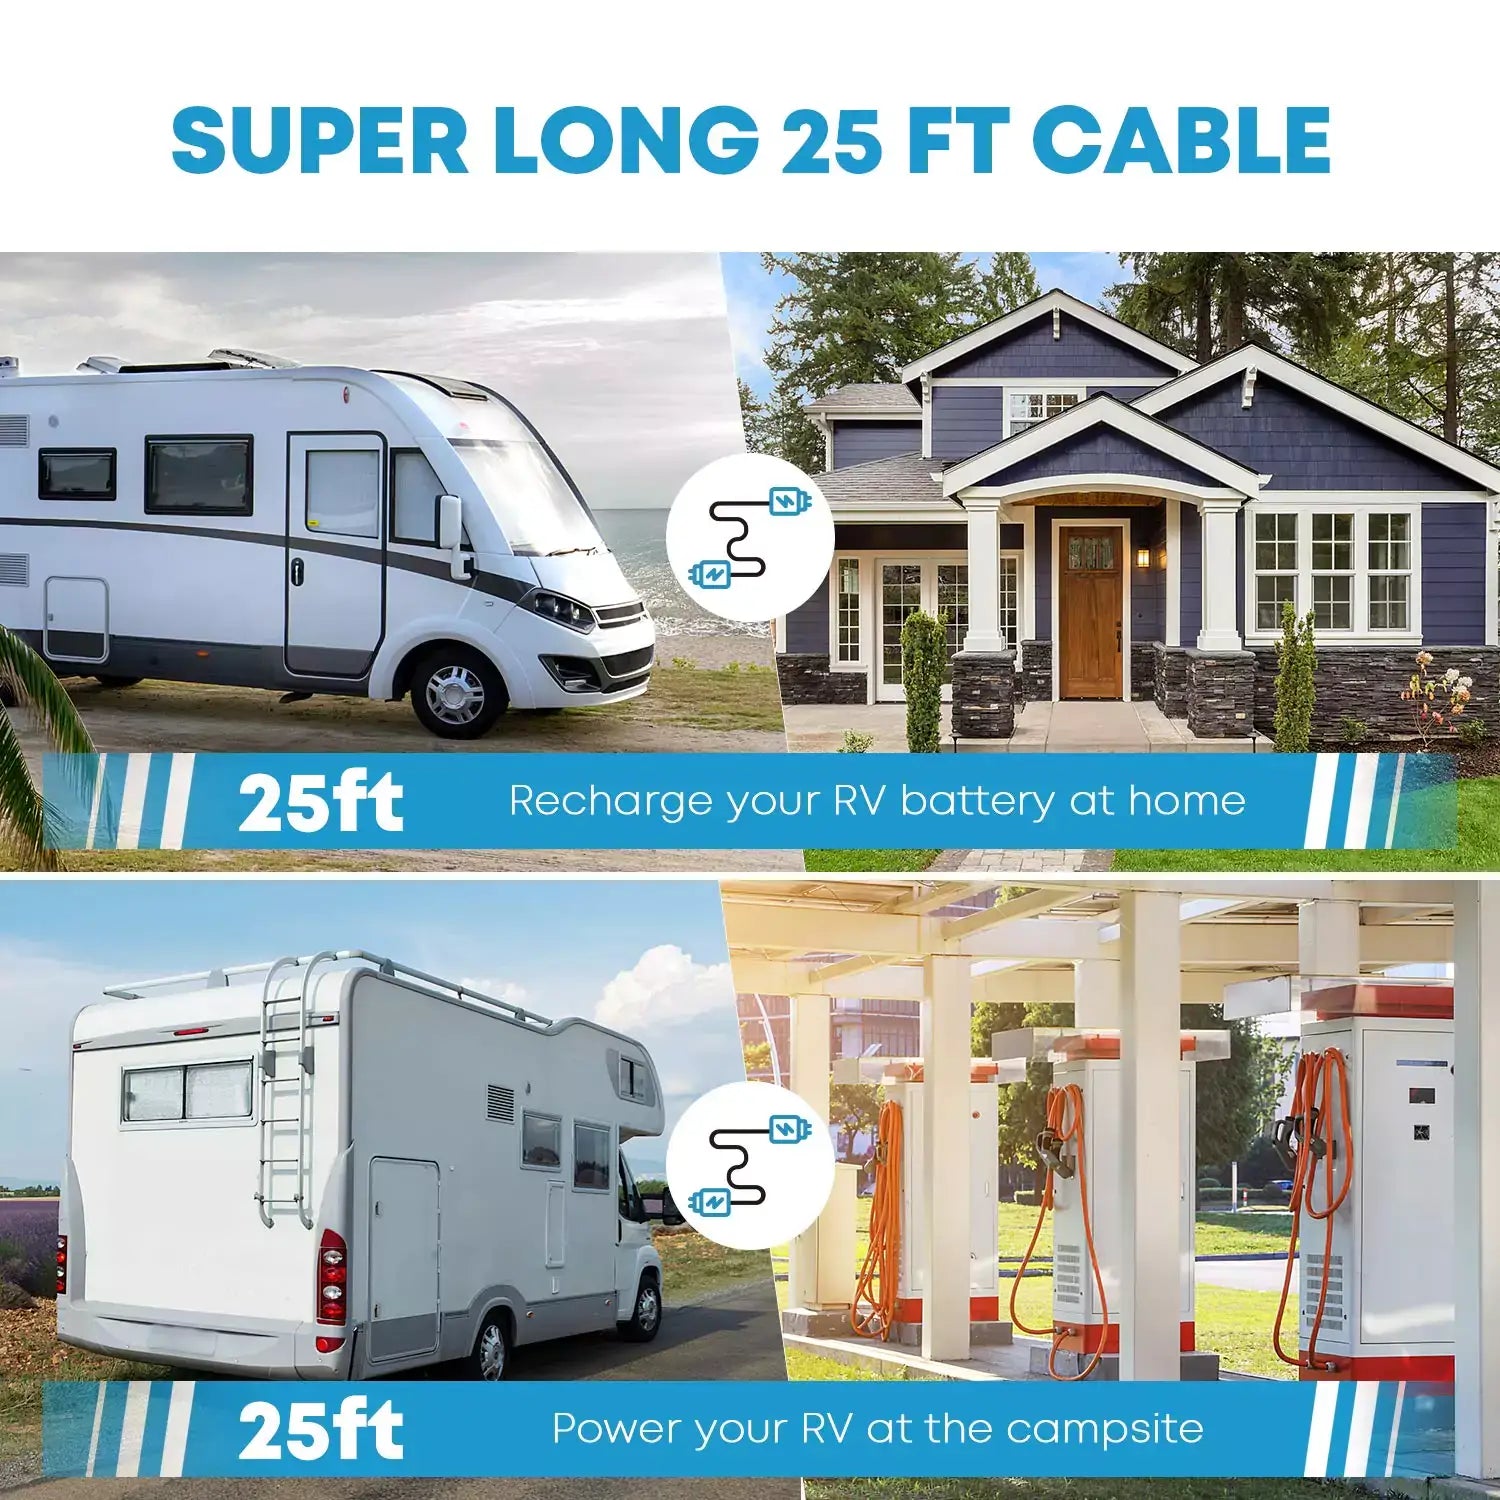 Super long 25 feet cable for outdoor